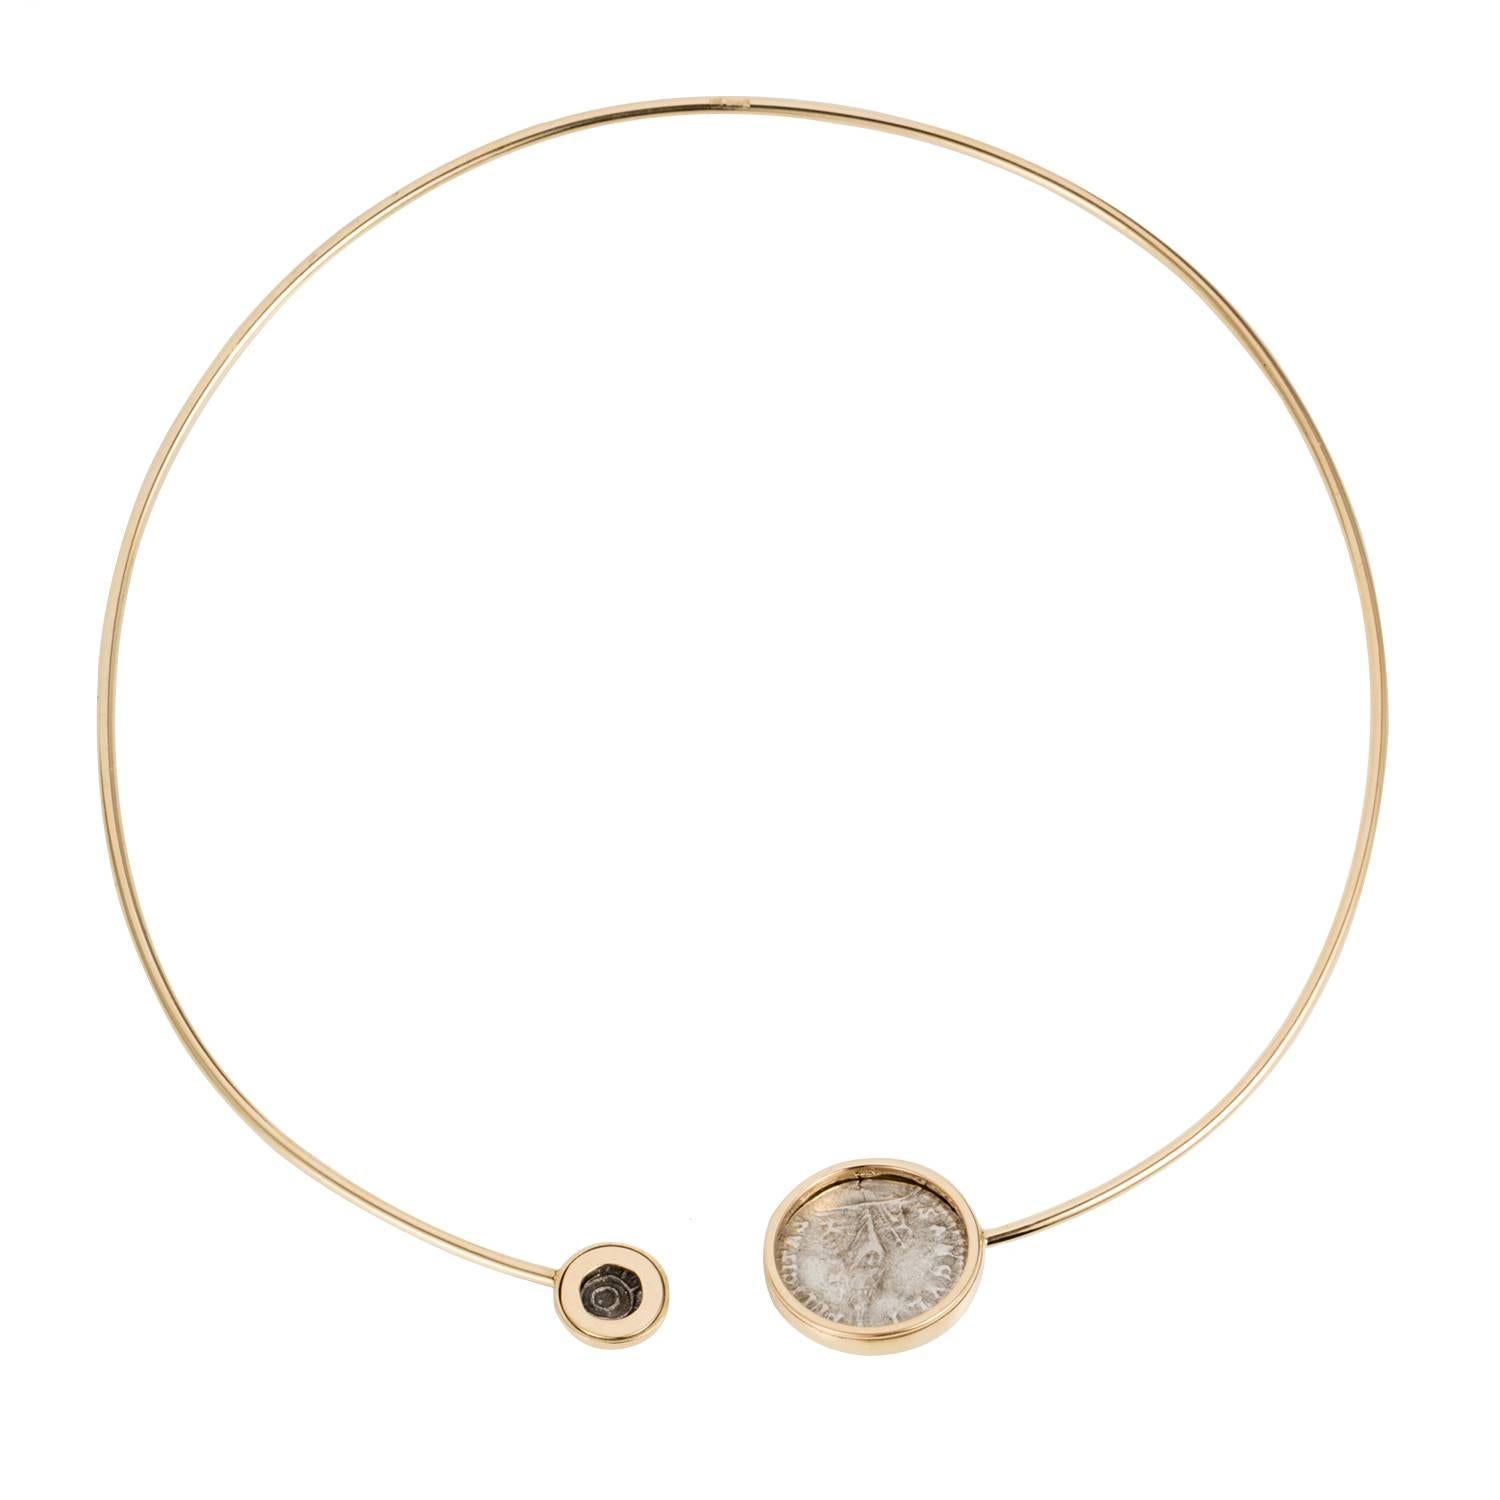 This DUBINI coin choker from the 'Empires' collection features an authentic silver Roman Imperial coin  and an authentic silver Persepolis coin minted circa 1st Century B.C. set in 18K yellow gold. 

* Due to the unique process of hand carving coins